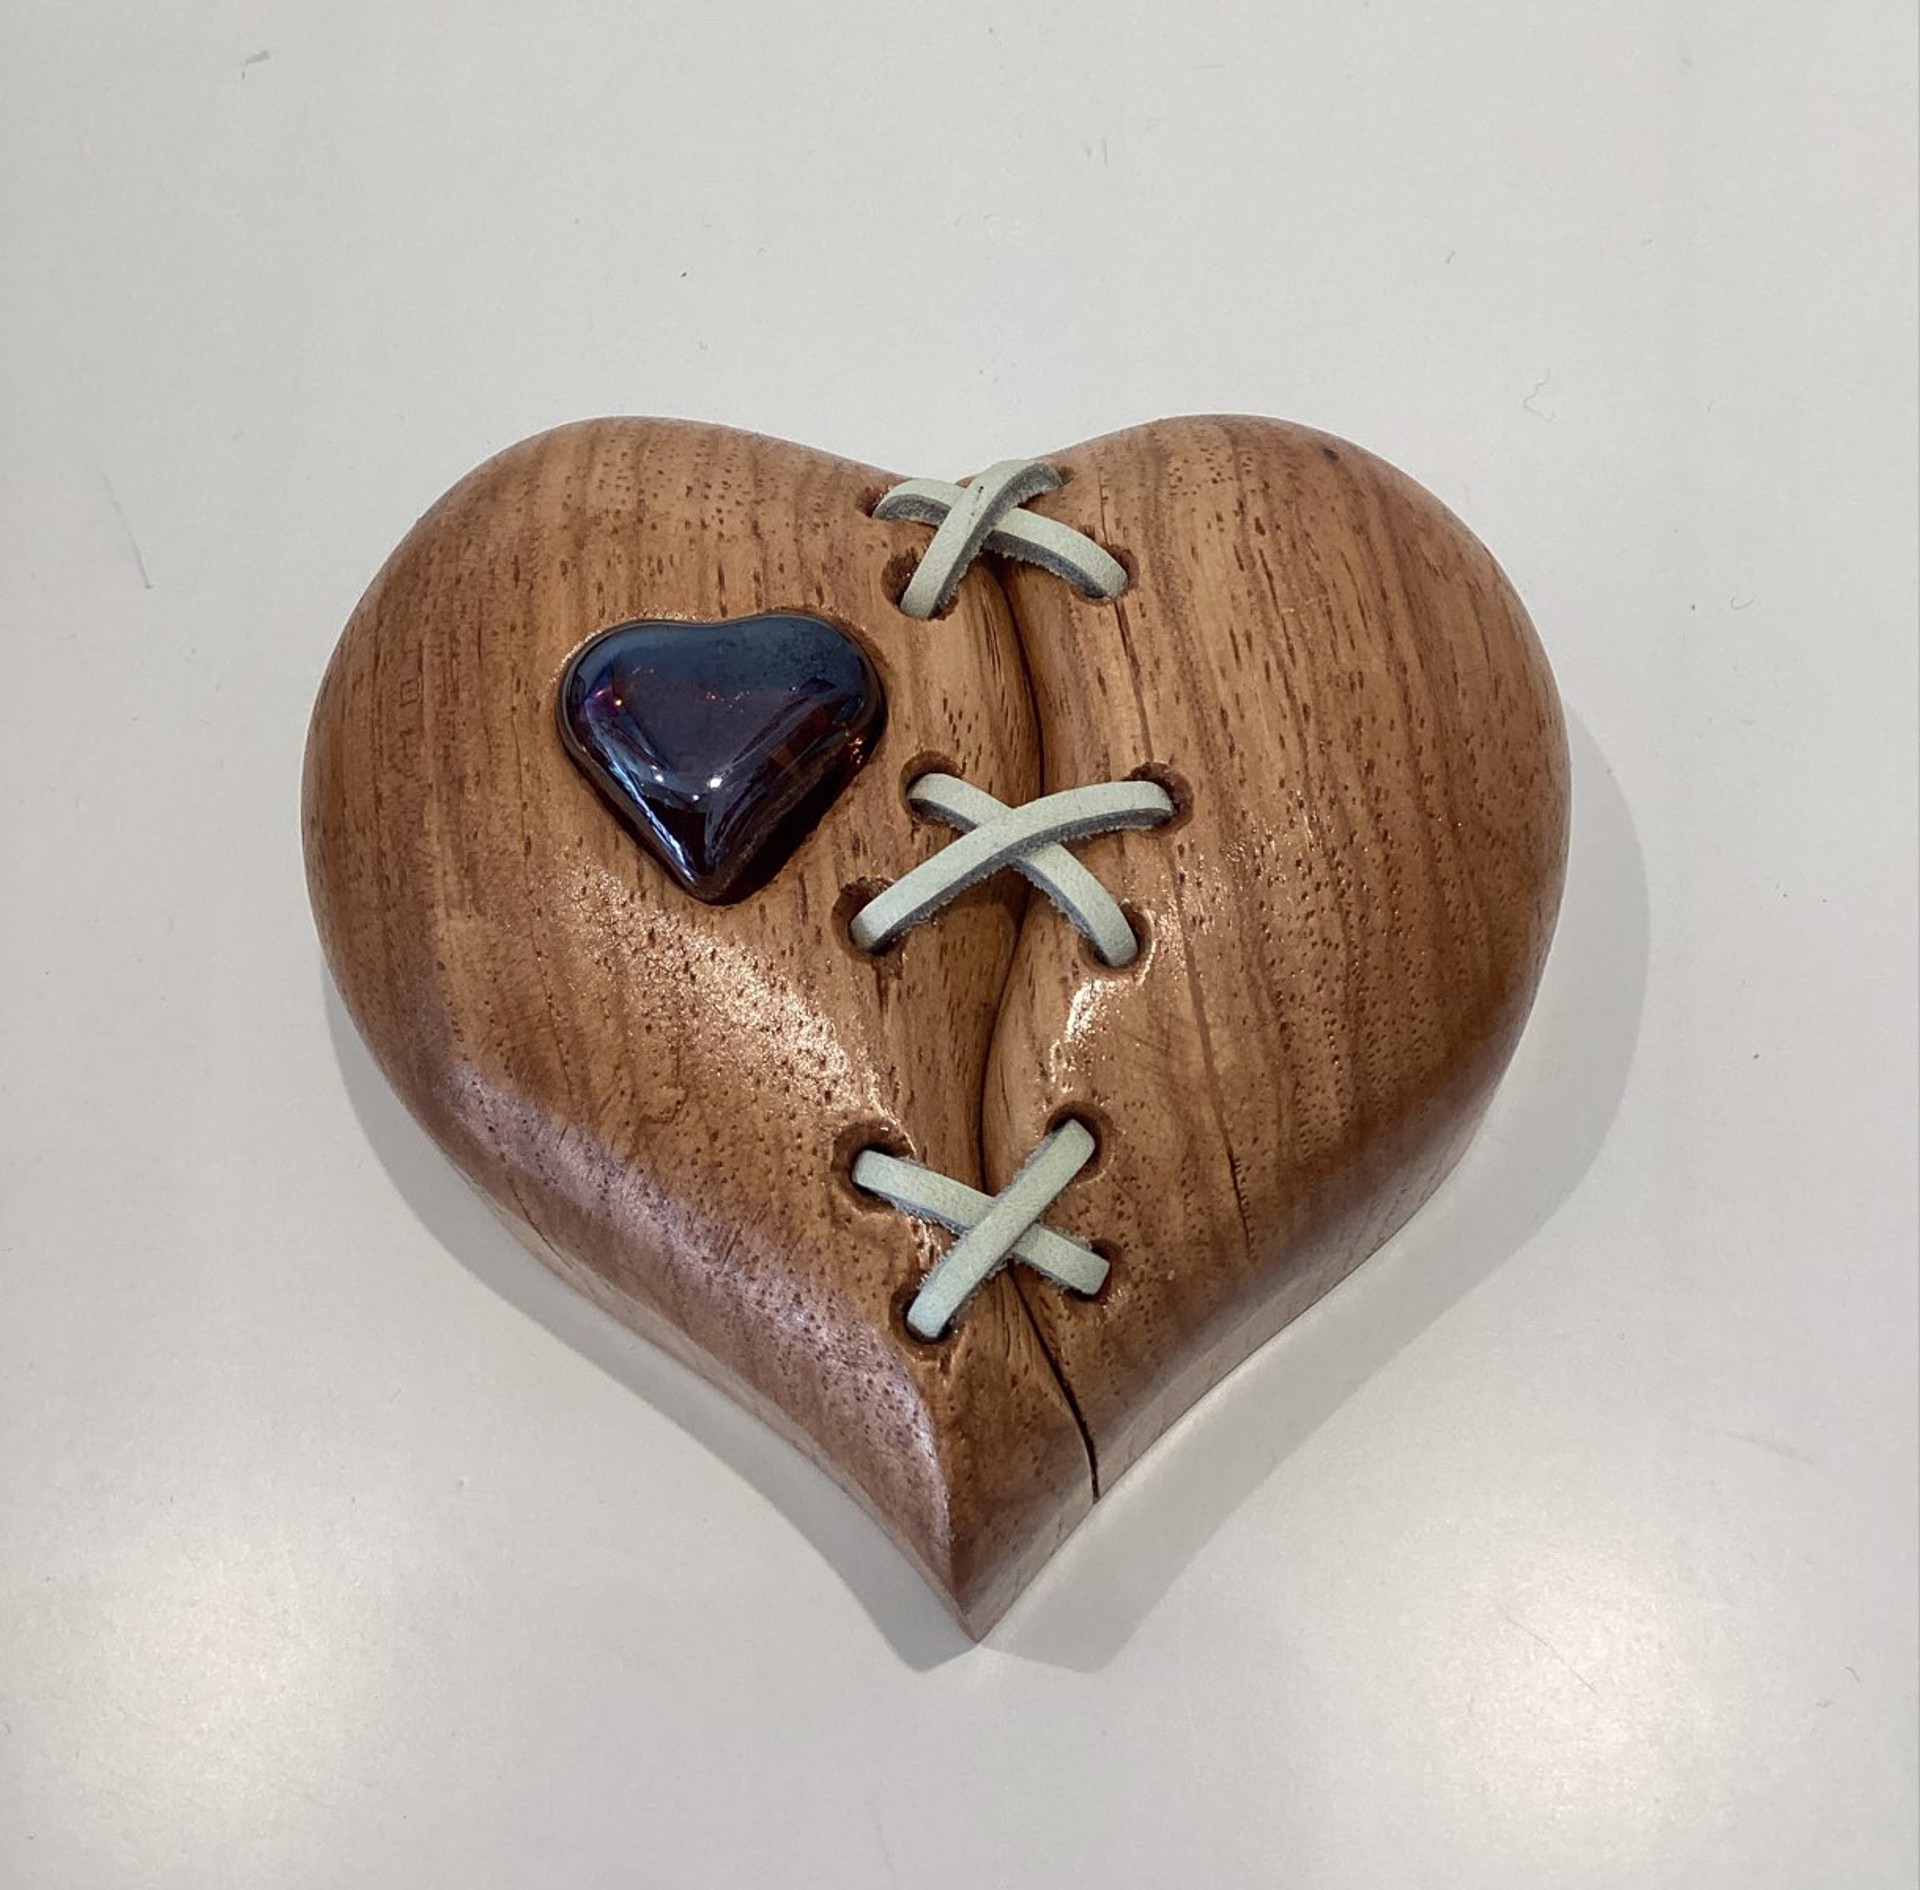 Mended Broken Heart With Glass Heart by Mel Johnson